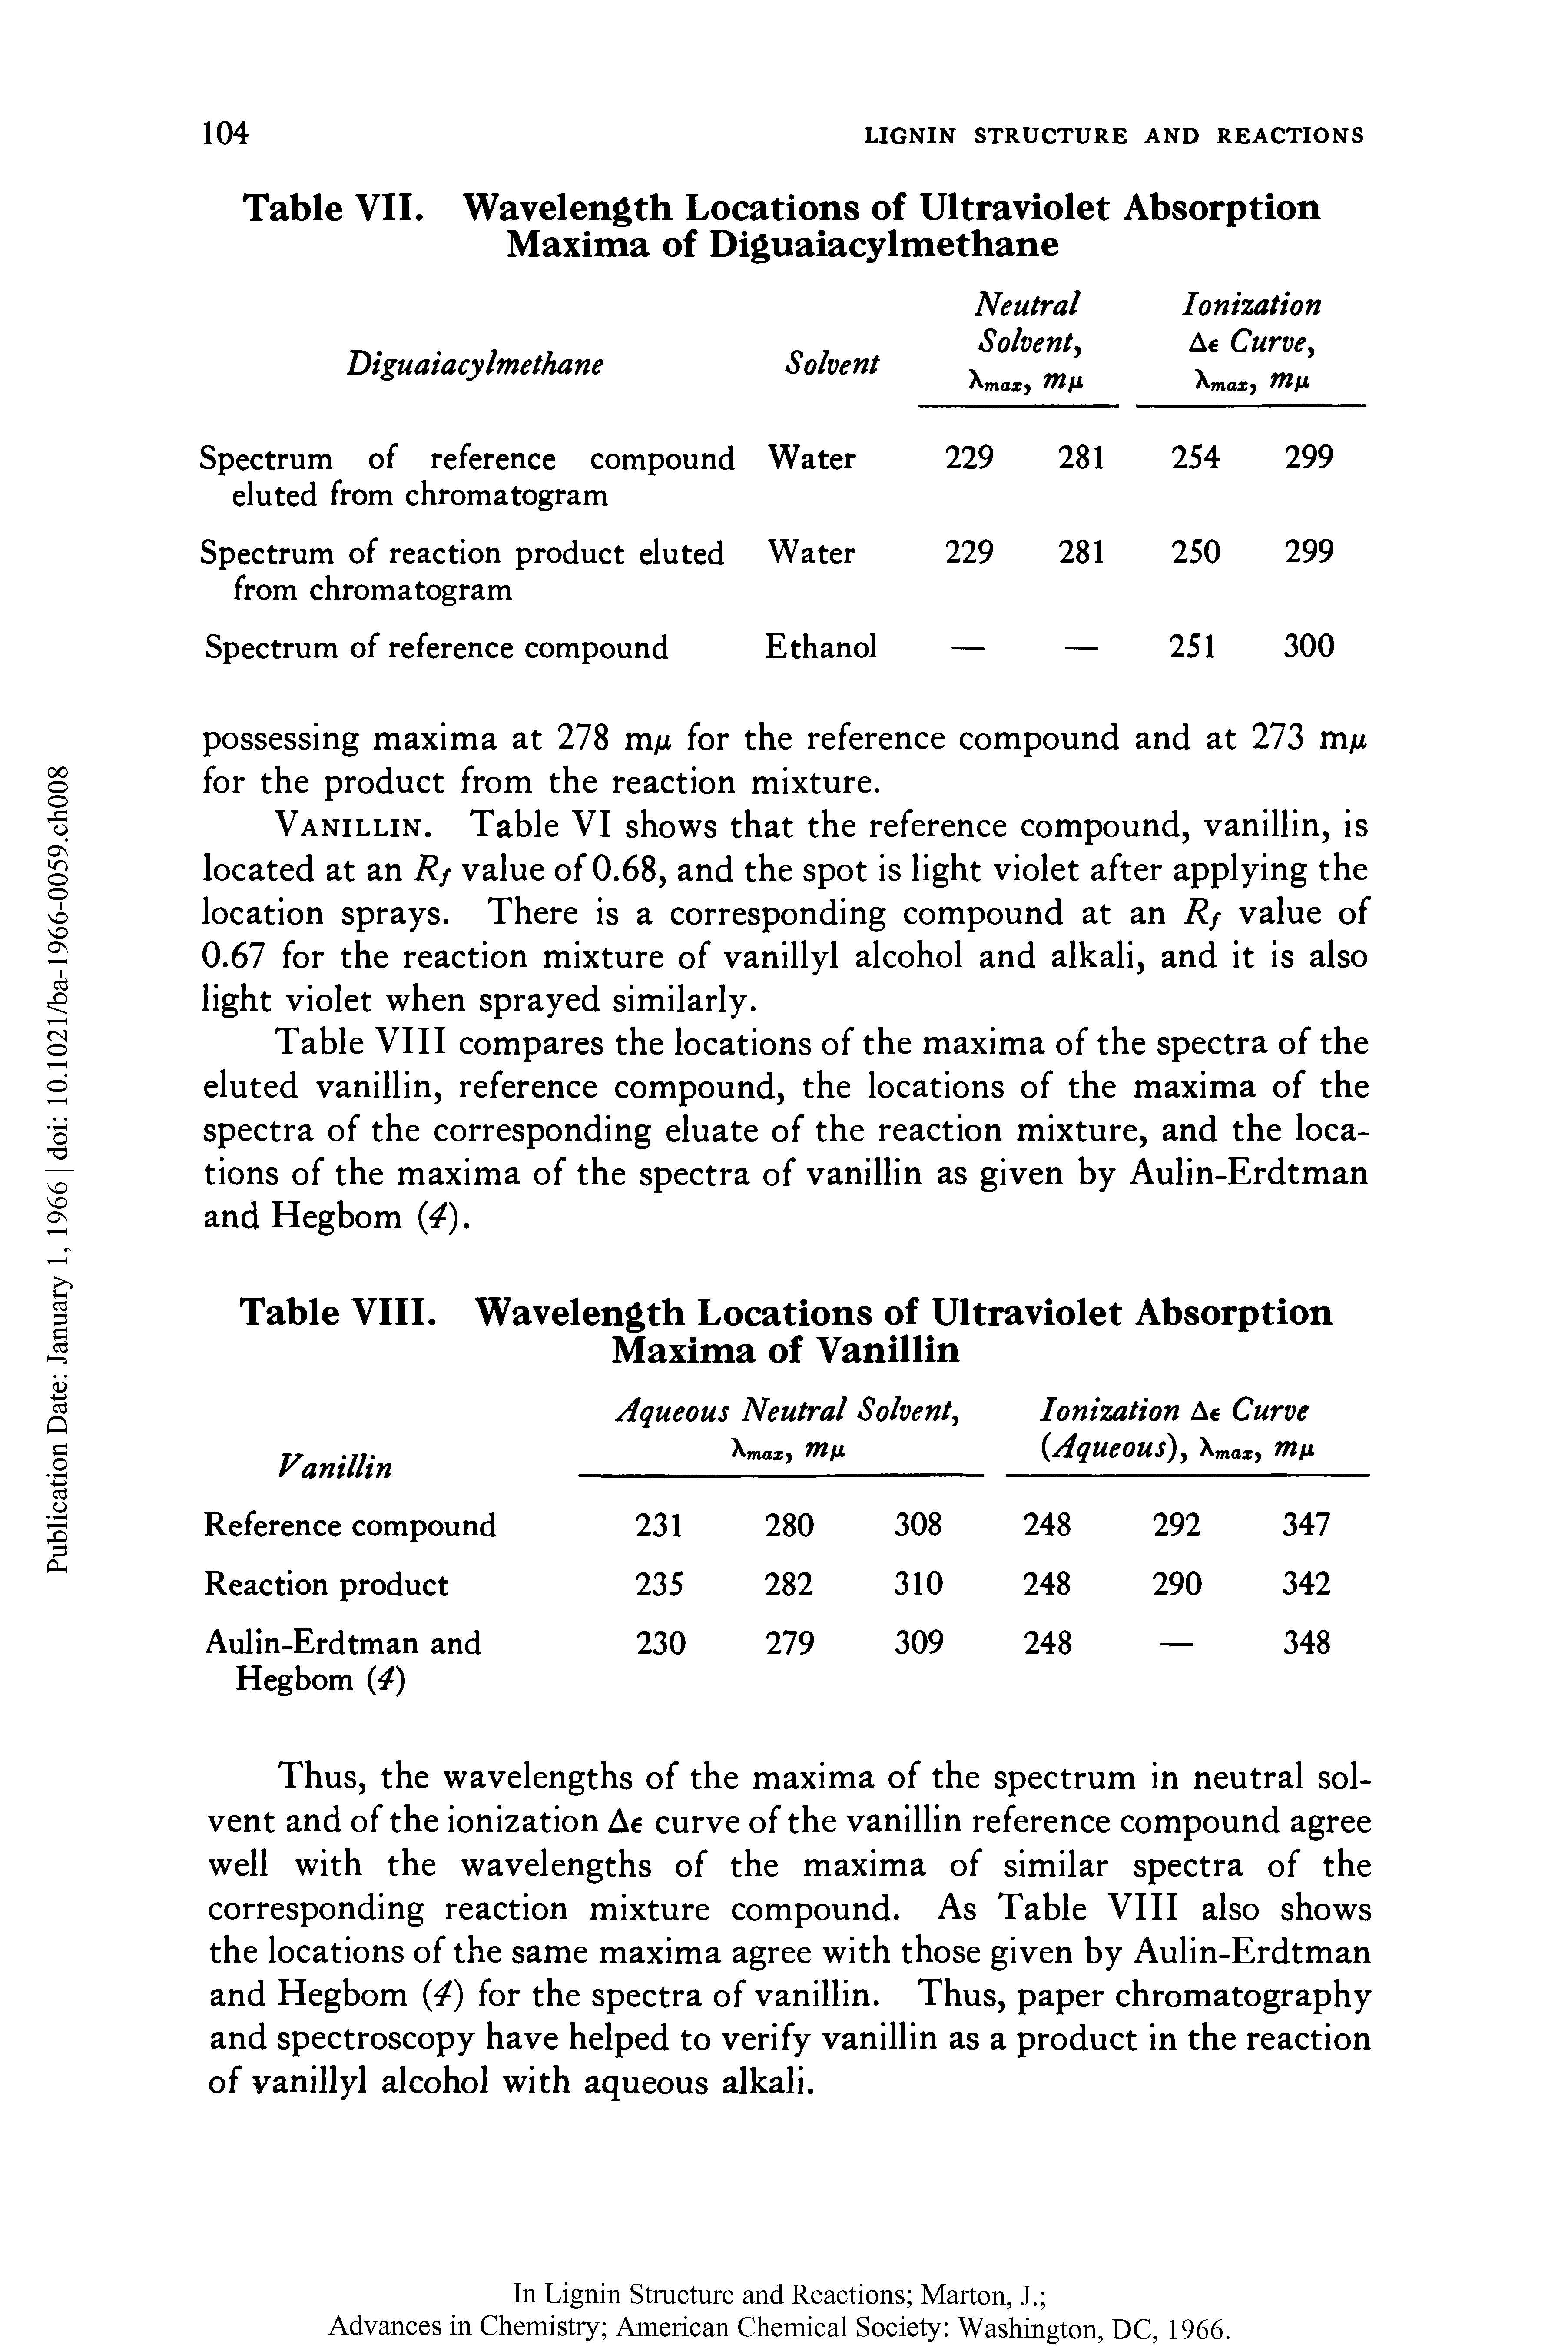 Table VIII compares the locations of the maxima of the spectra of the eluted vanillin, reference compound, the locations of the maxima of the spectra of the corresponding eluate of the reaction mixture, and the locations of the maxima of the spectra of vanillin as given by Aulin-Erdtman and Hegbom 4).